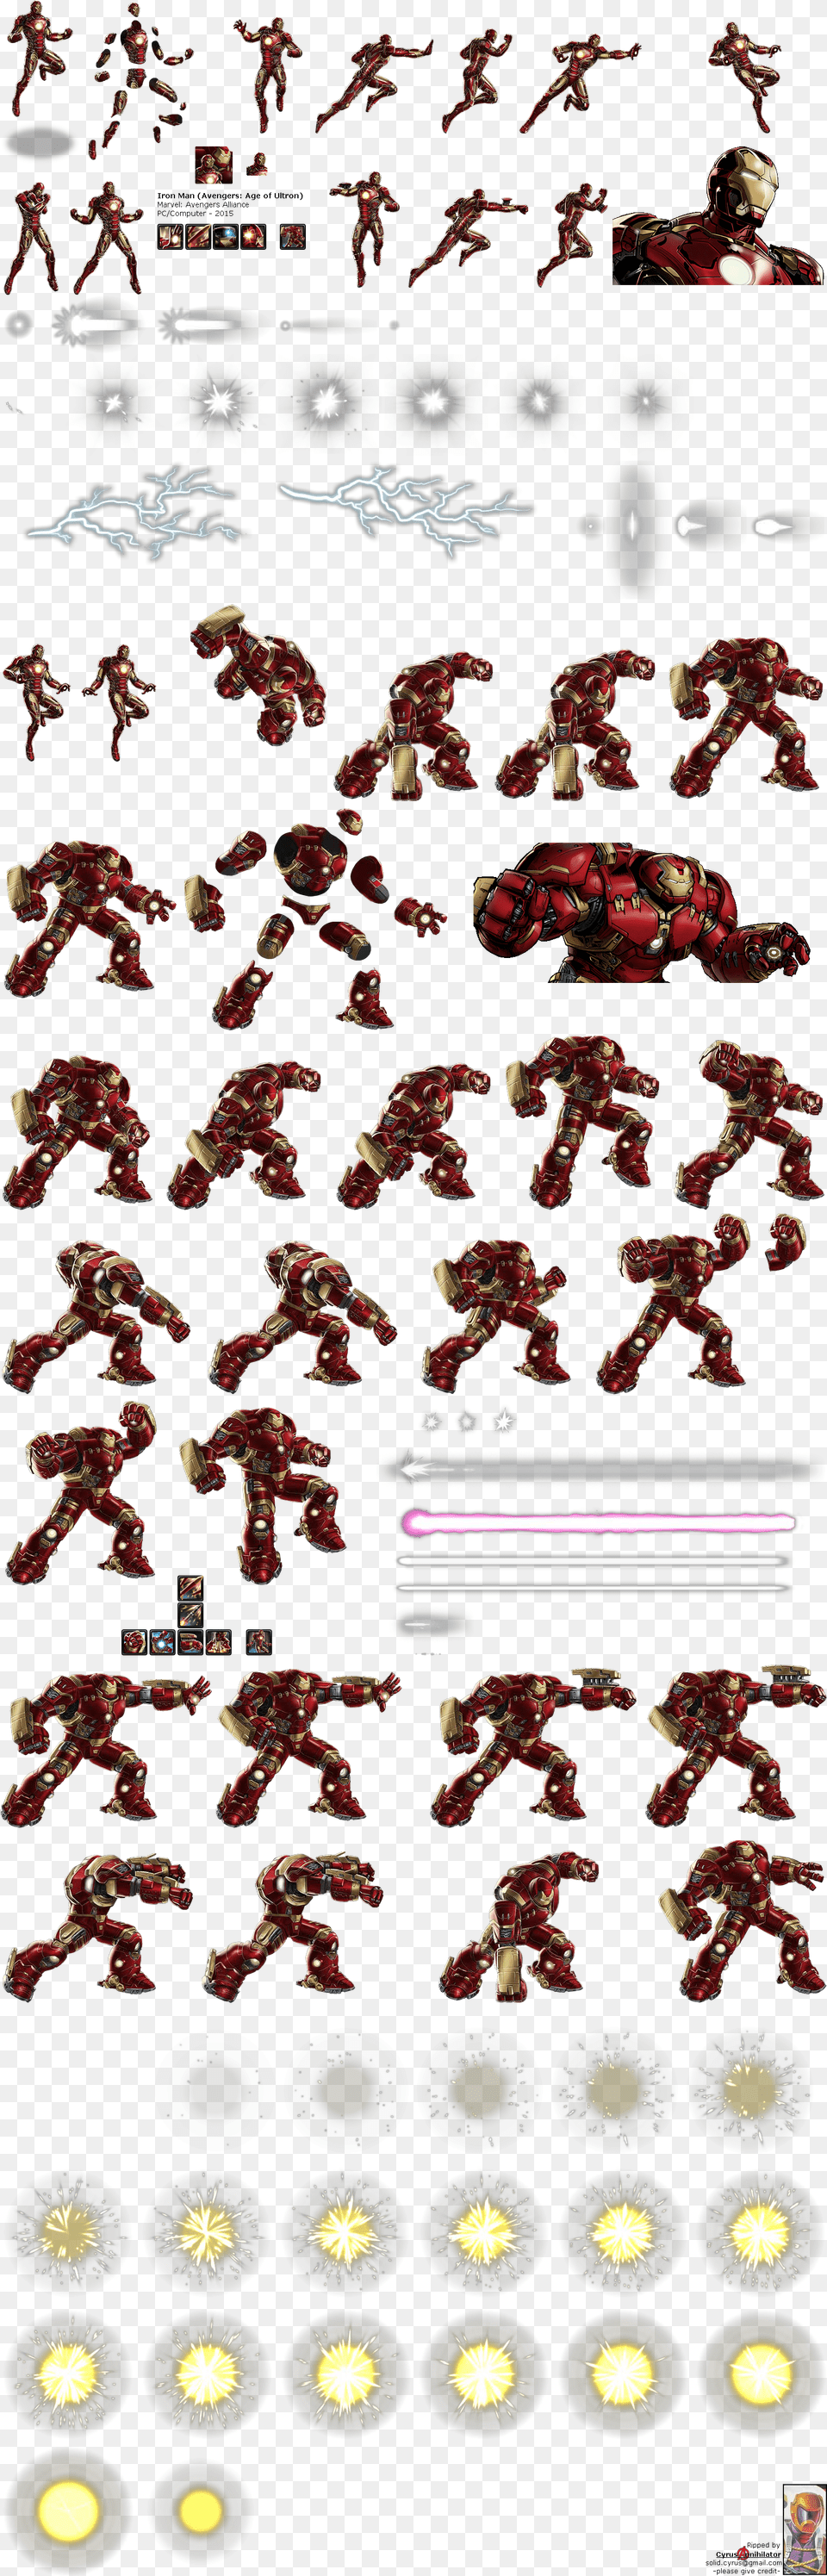 Ultron Clipart Marvel Avengers Alliance Marvel Alliance 2 Iron Man Sprite Sheets Free Png